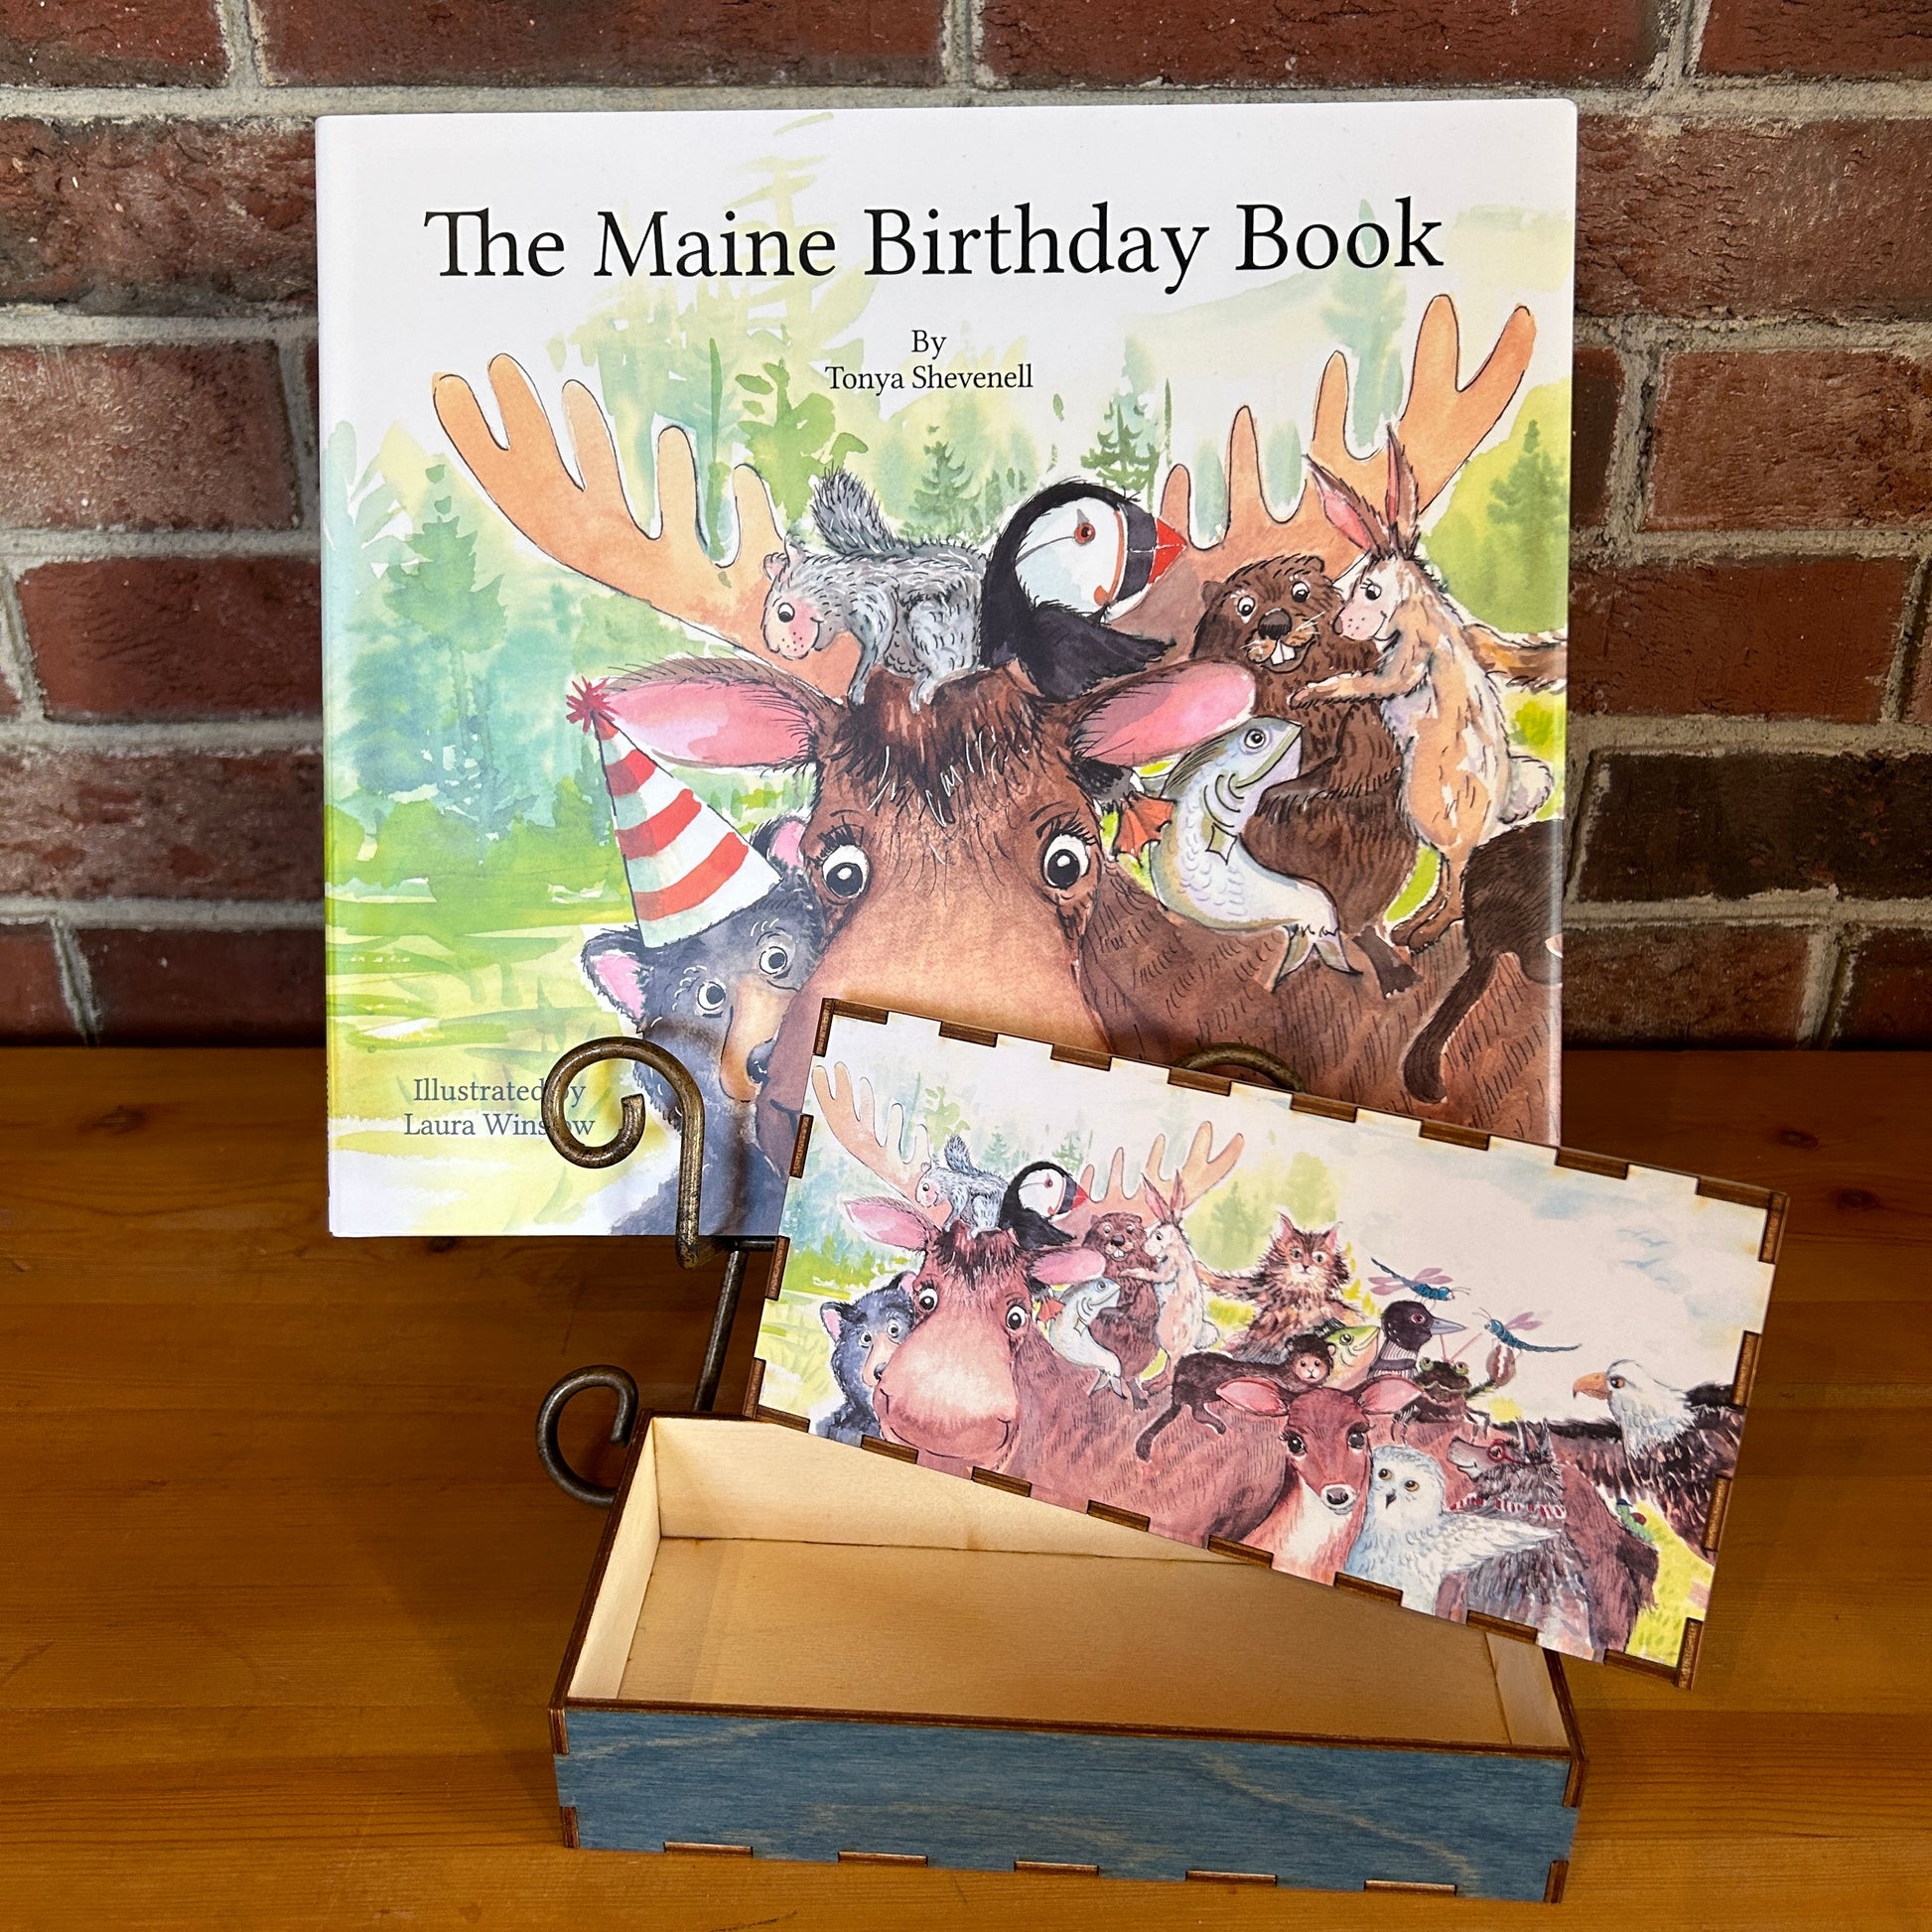 The Maine Birthday Book and a pencil box size Moose and Friends treasure box